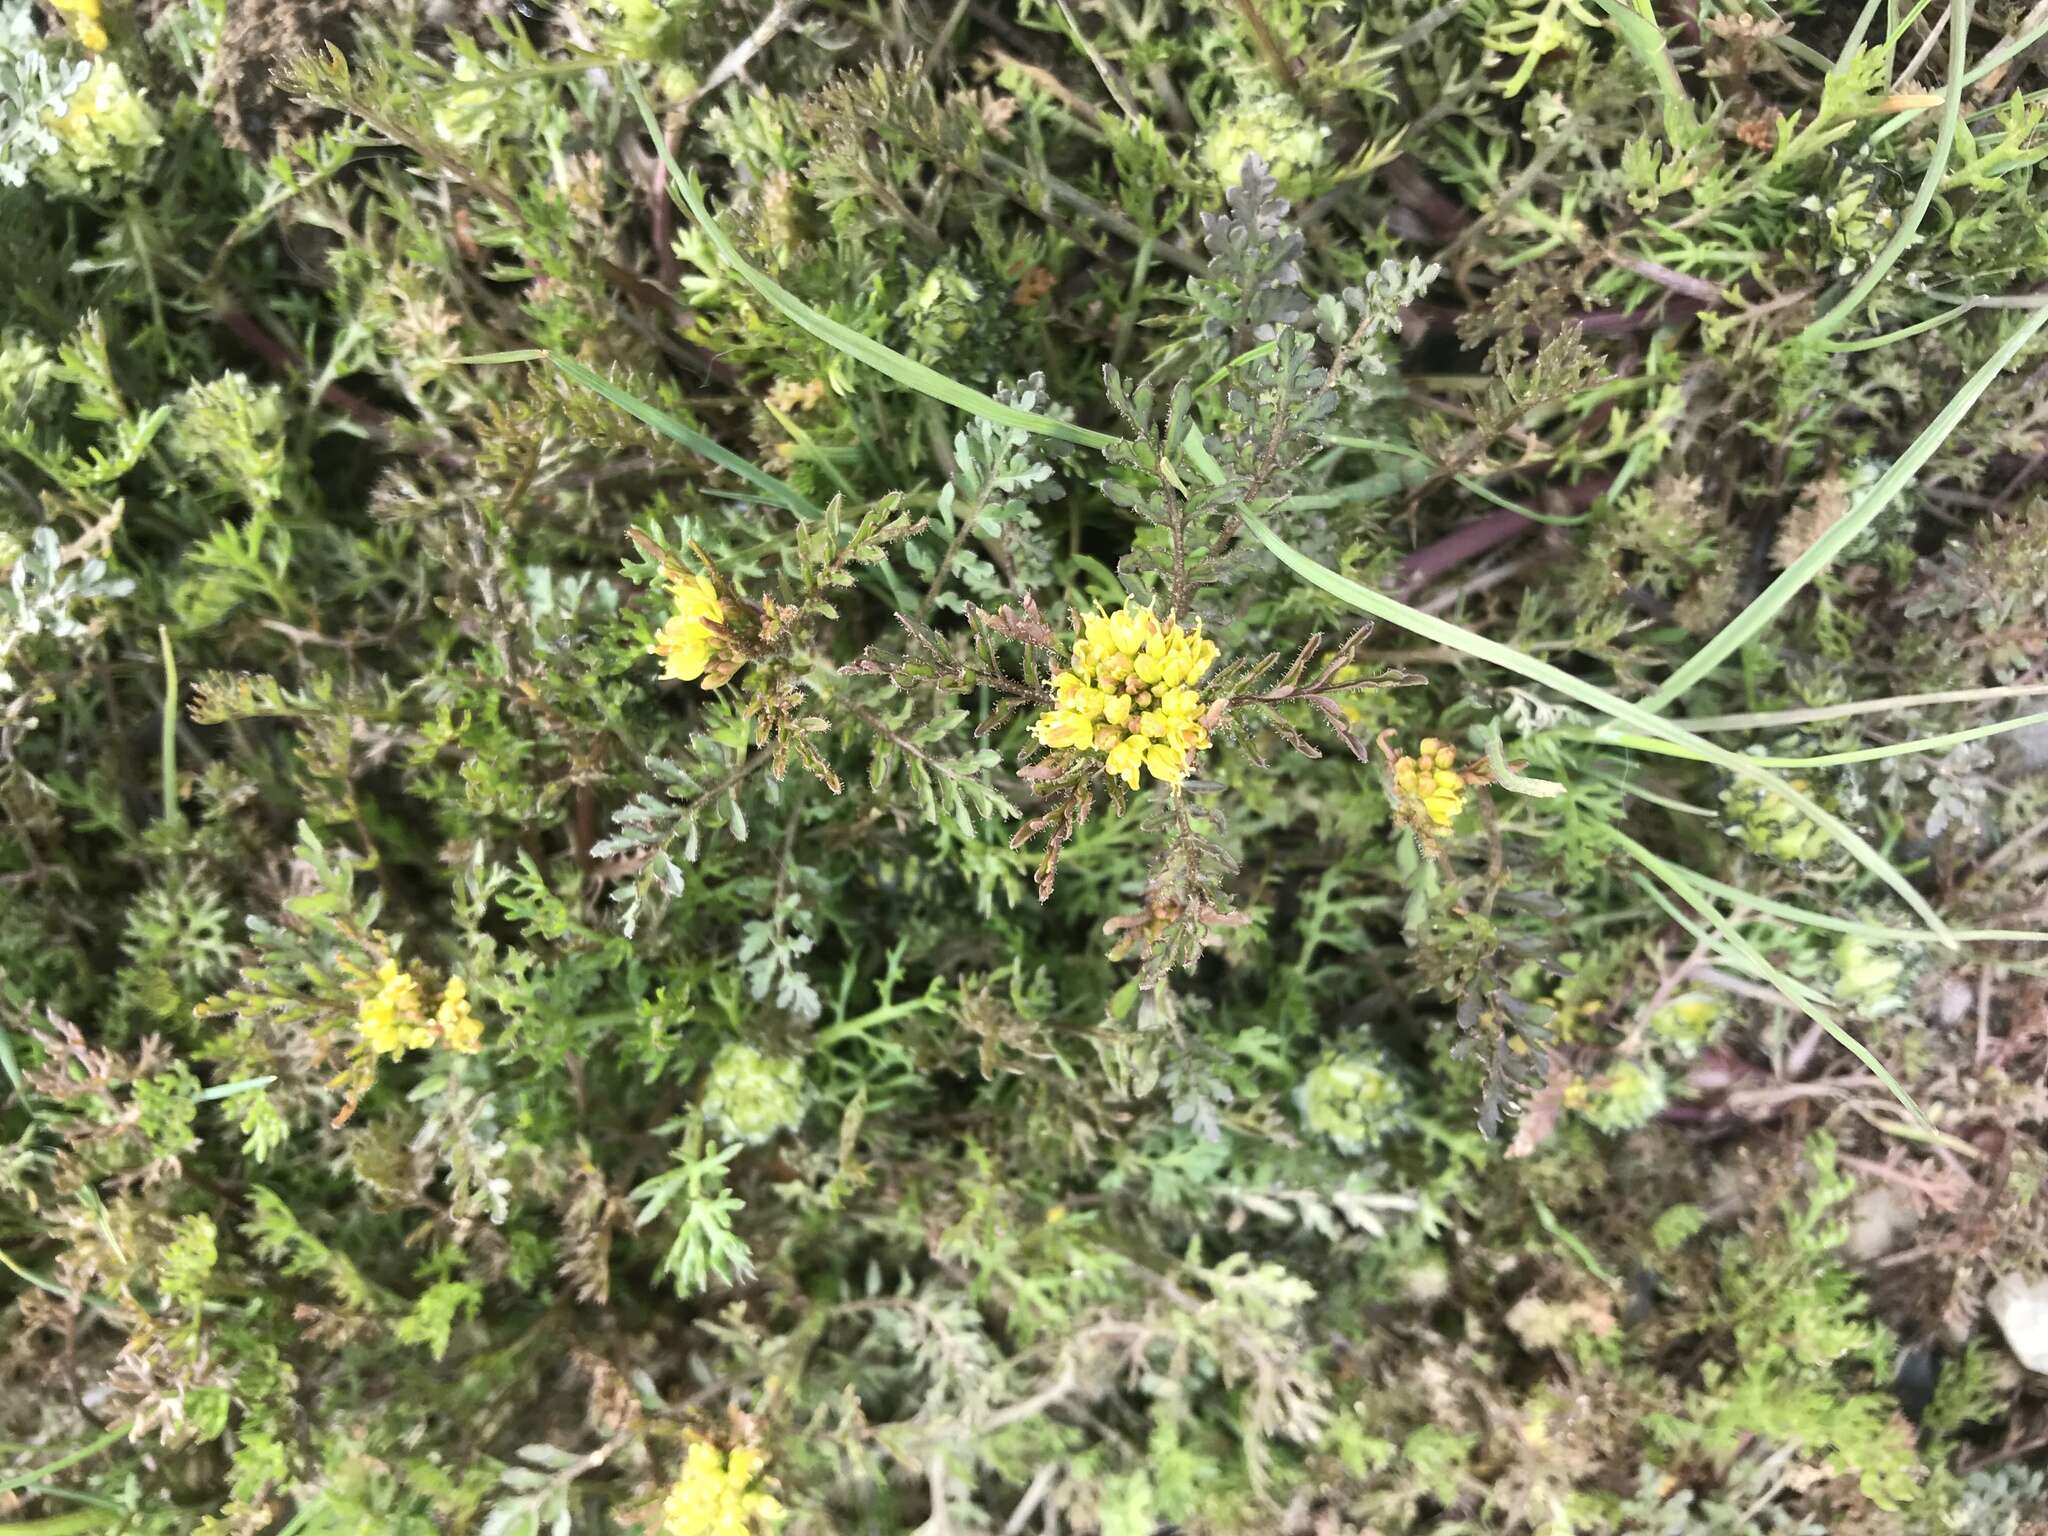 Image of northern tansymustard